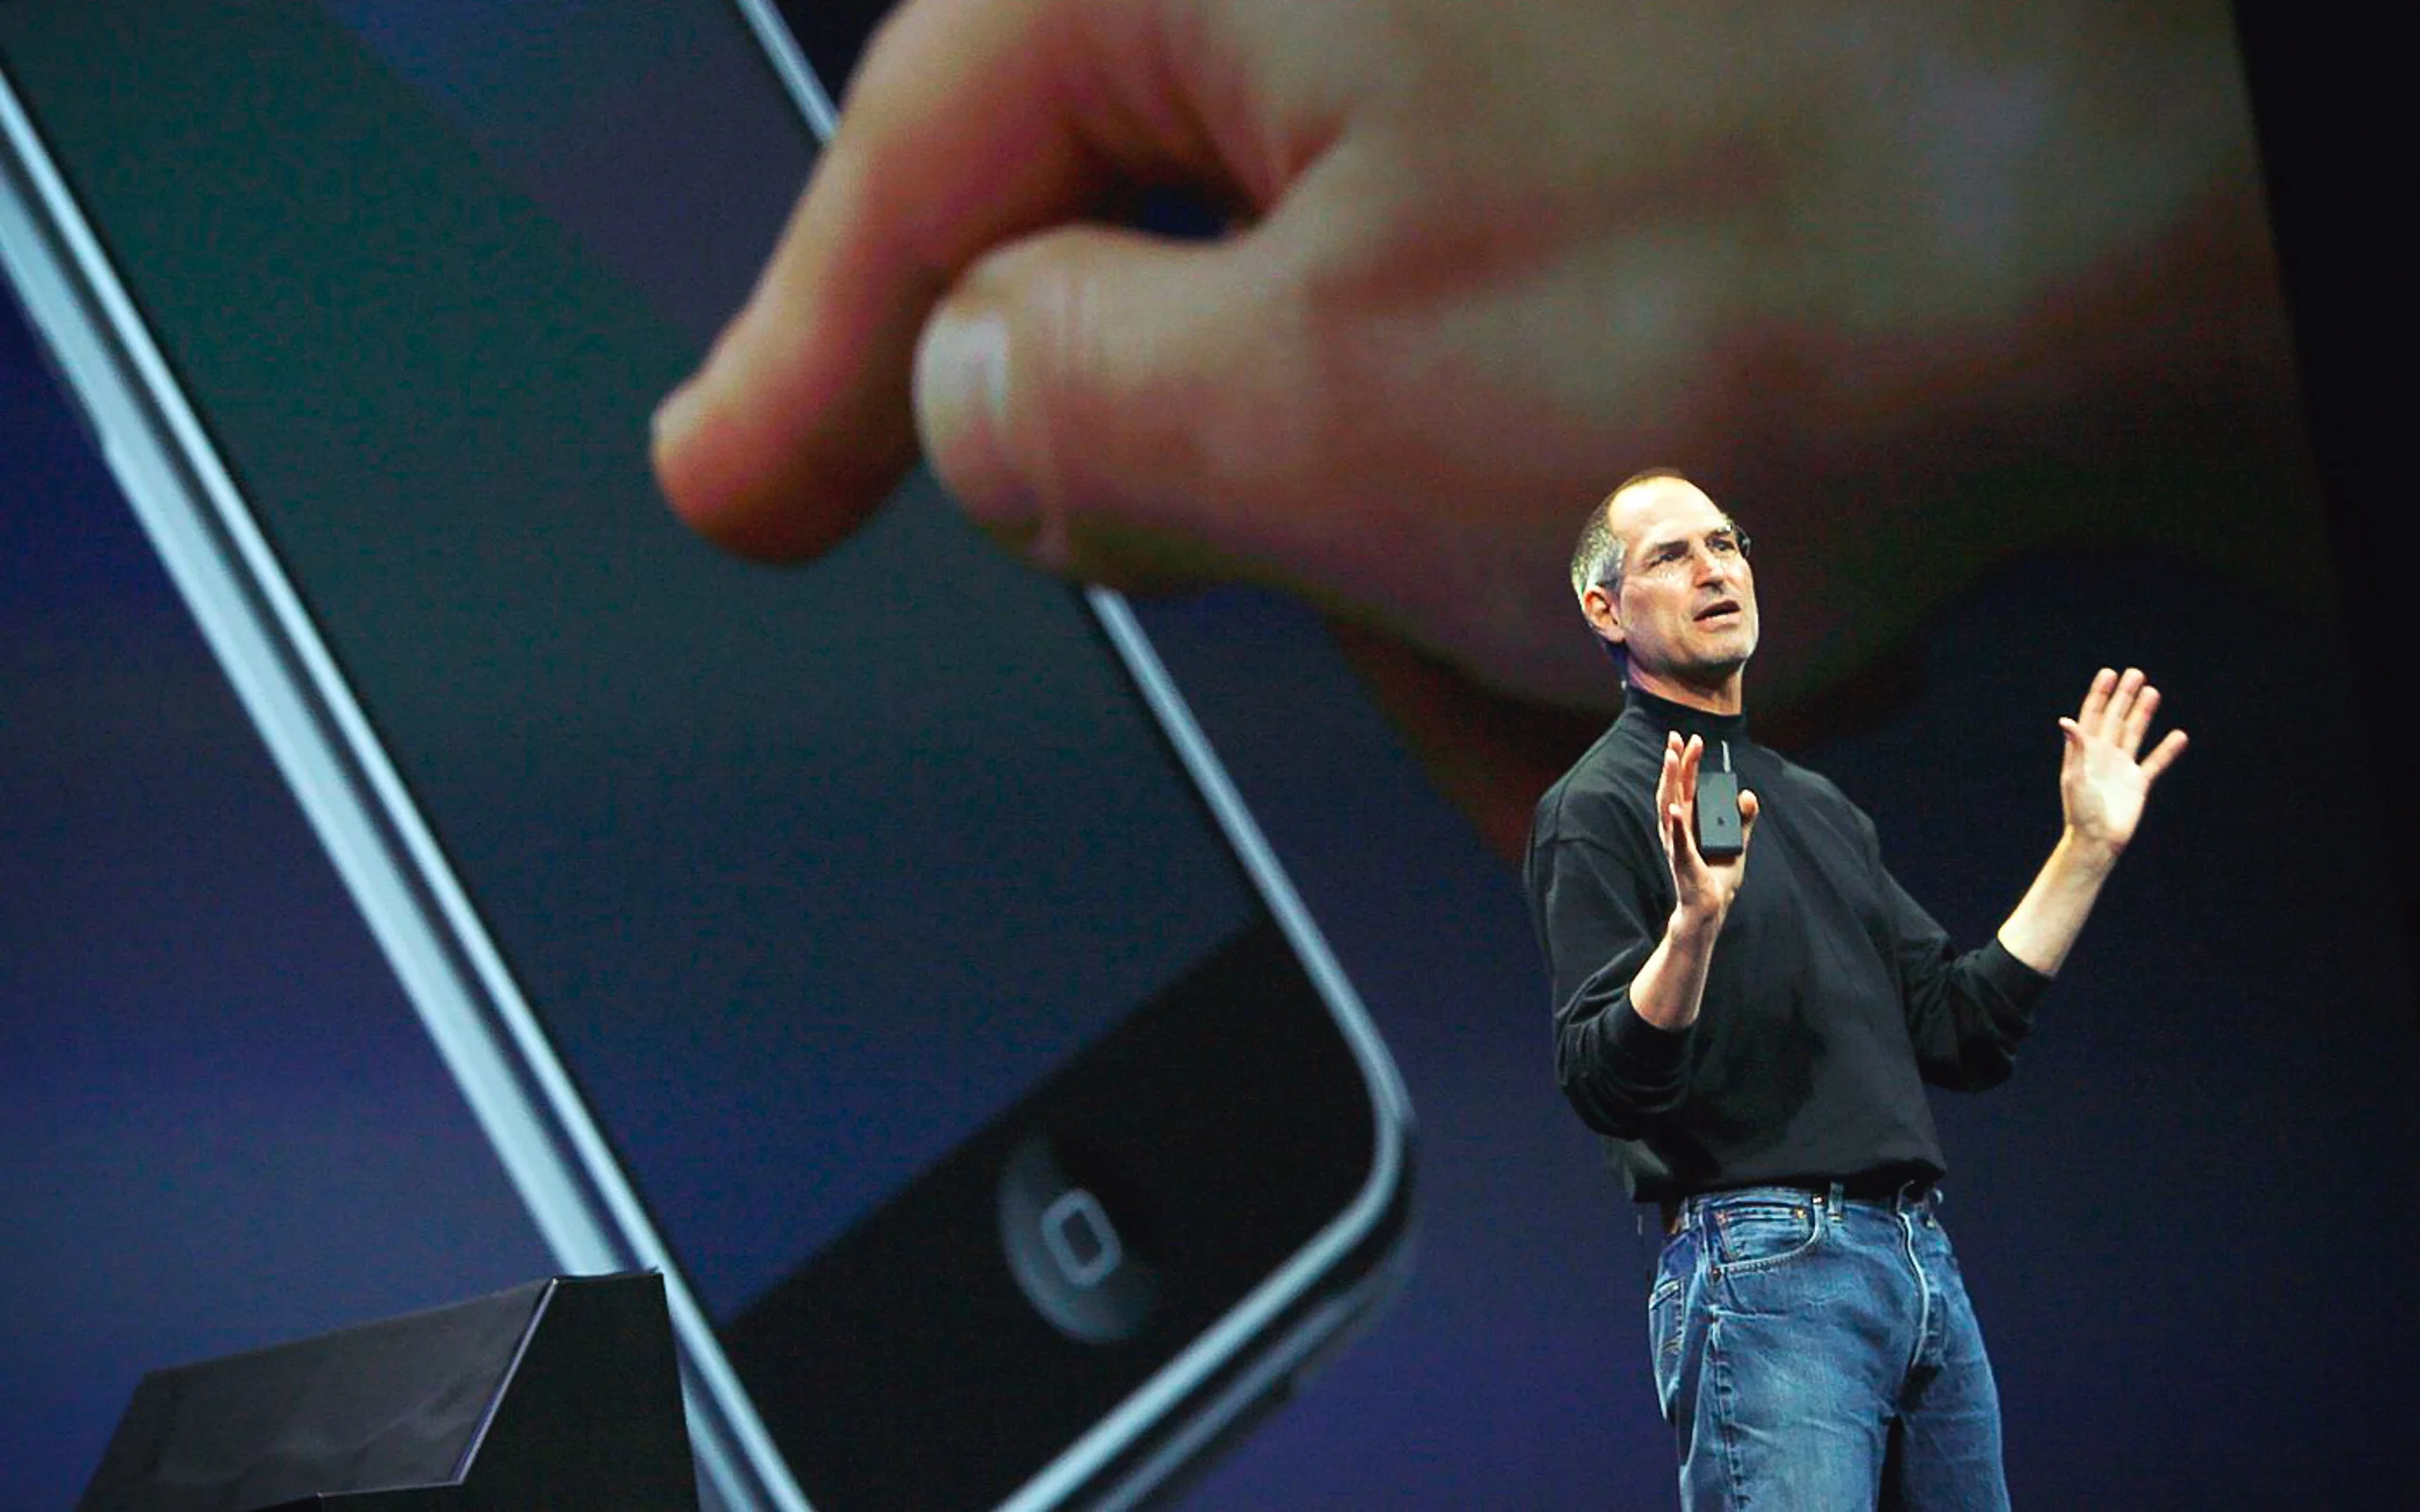 Steve Jobs standing on stage addressing a crowd about a new Apple product